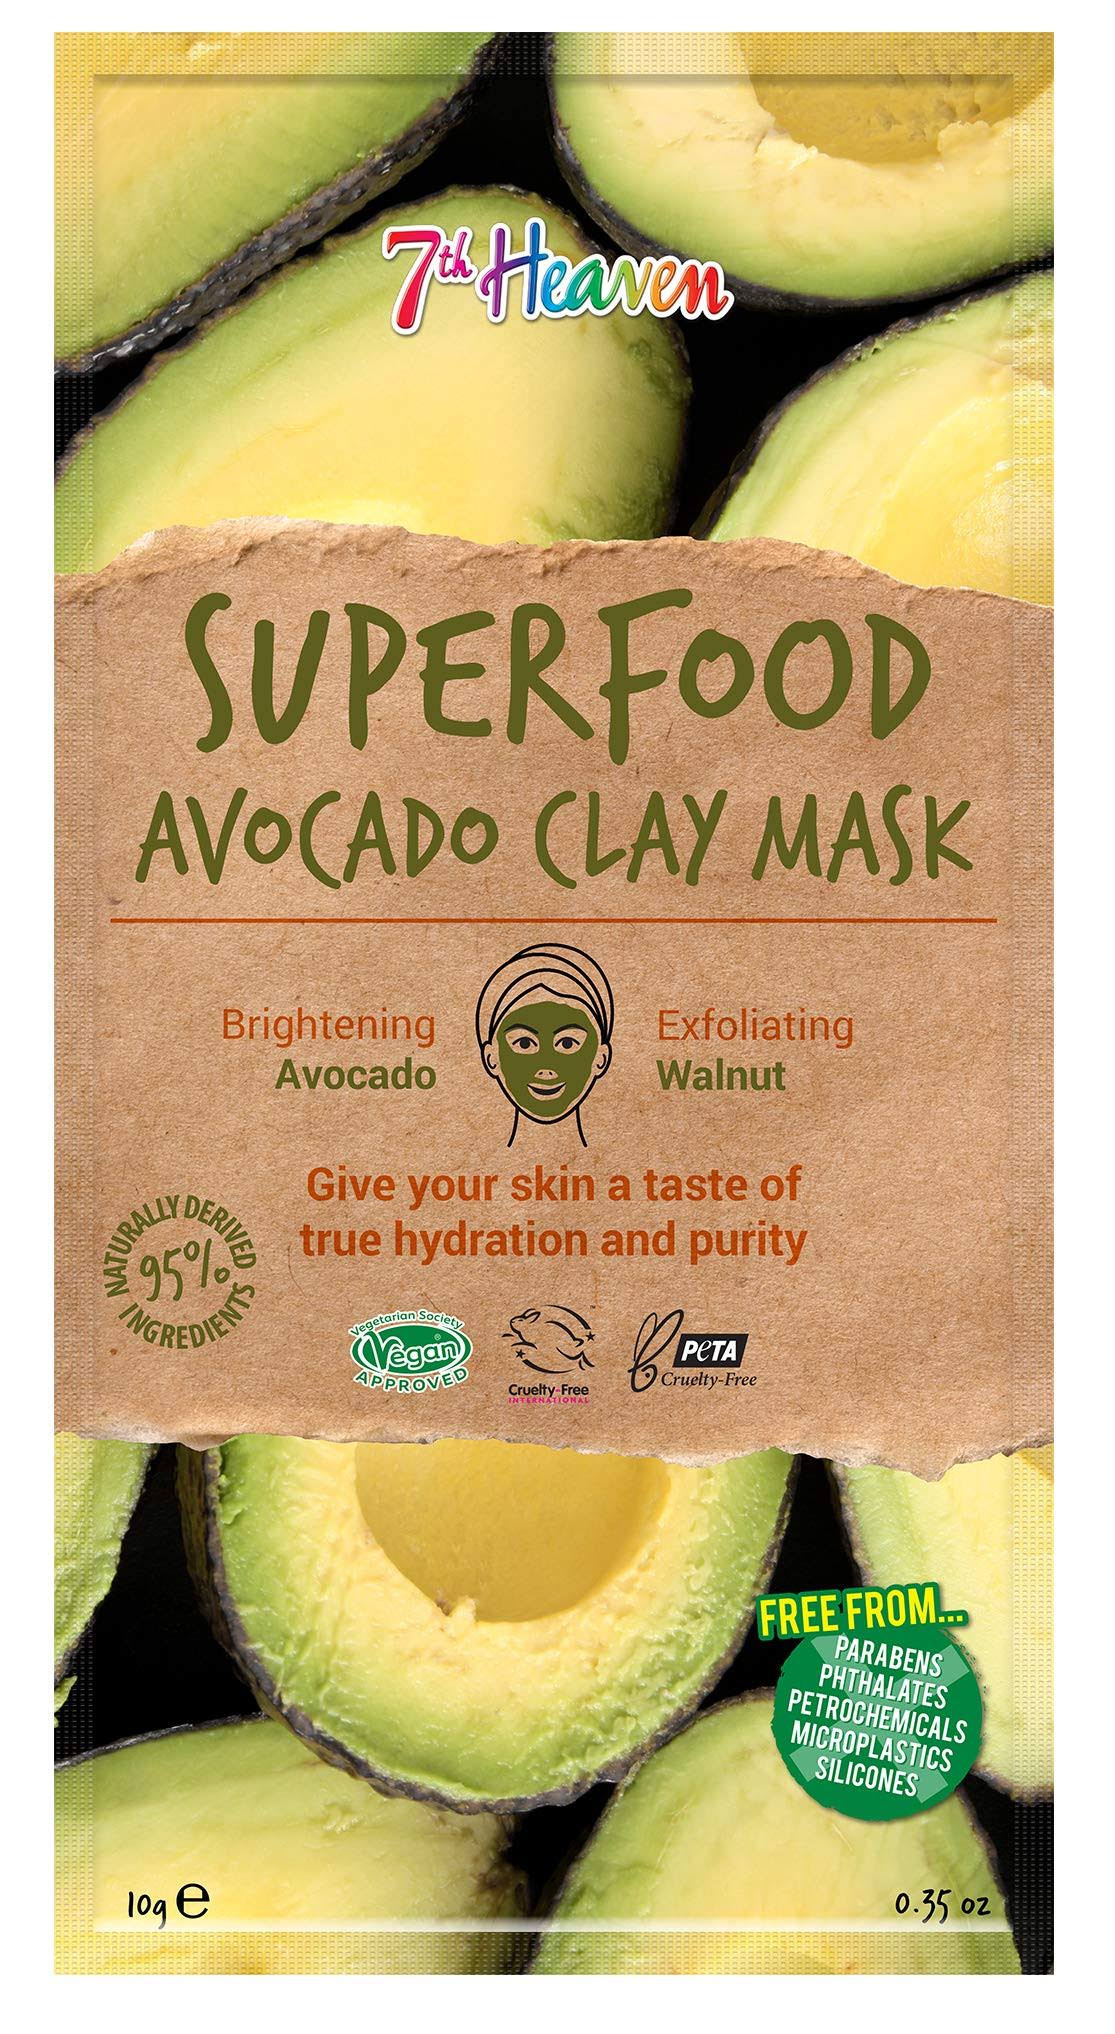 7th Heaven Superfood Avocado Clay Mask